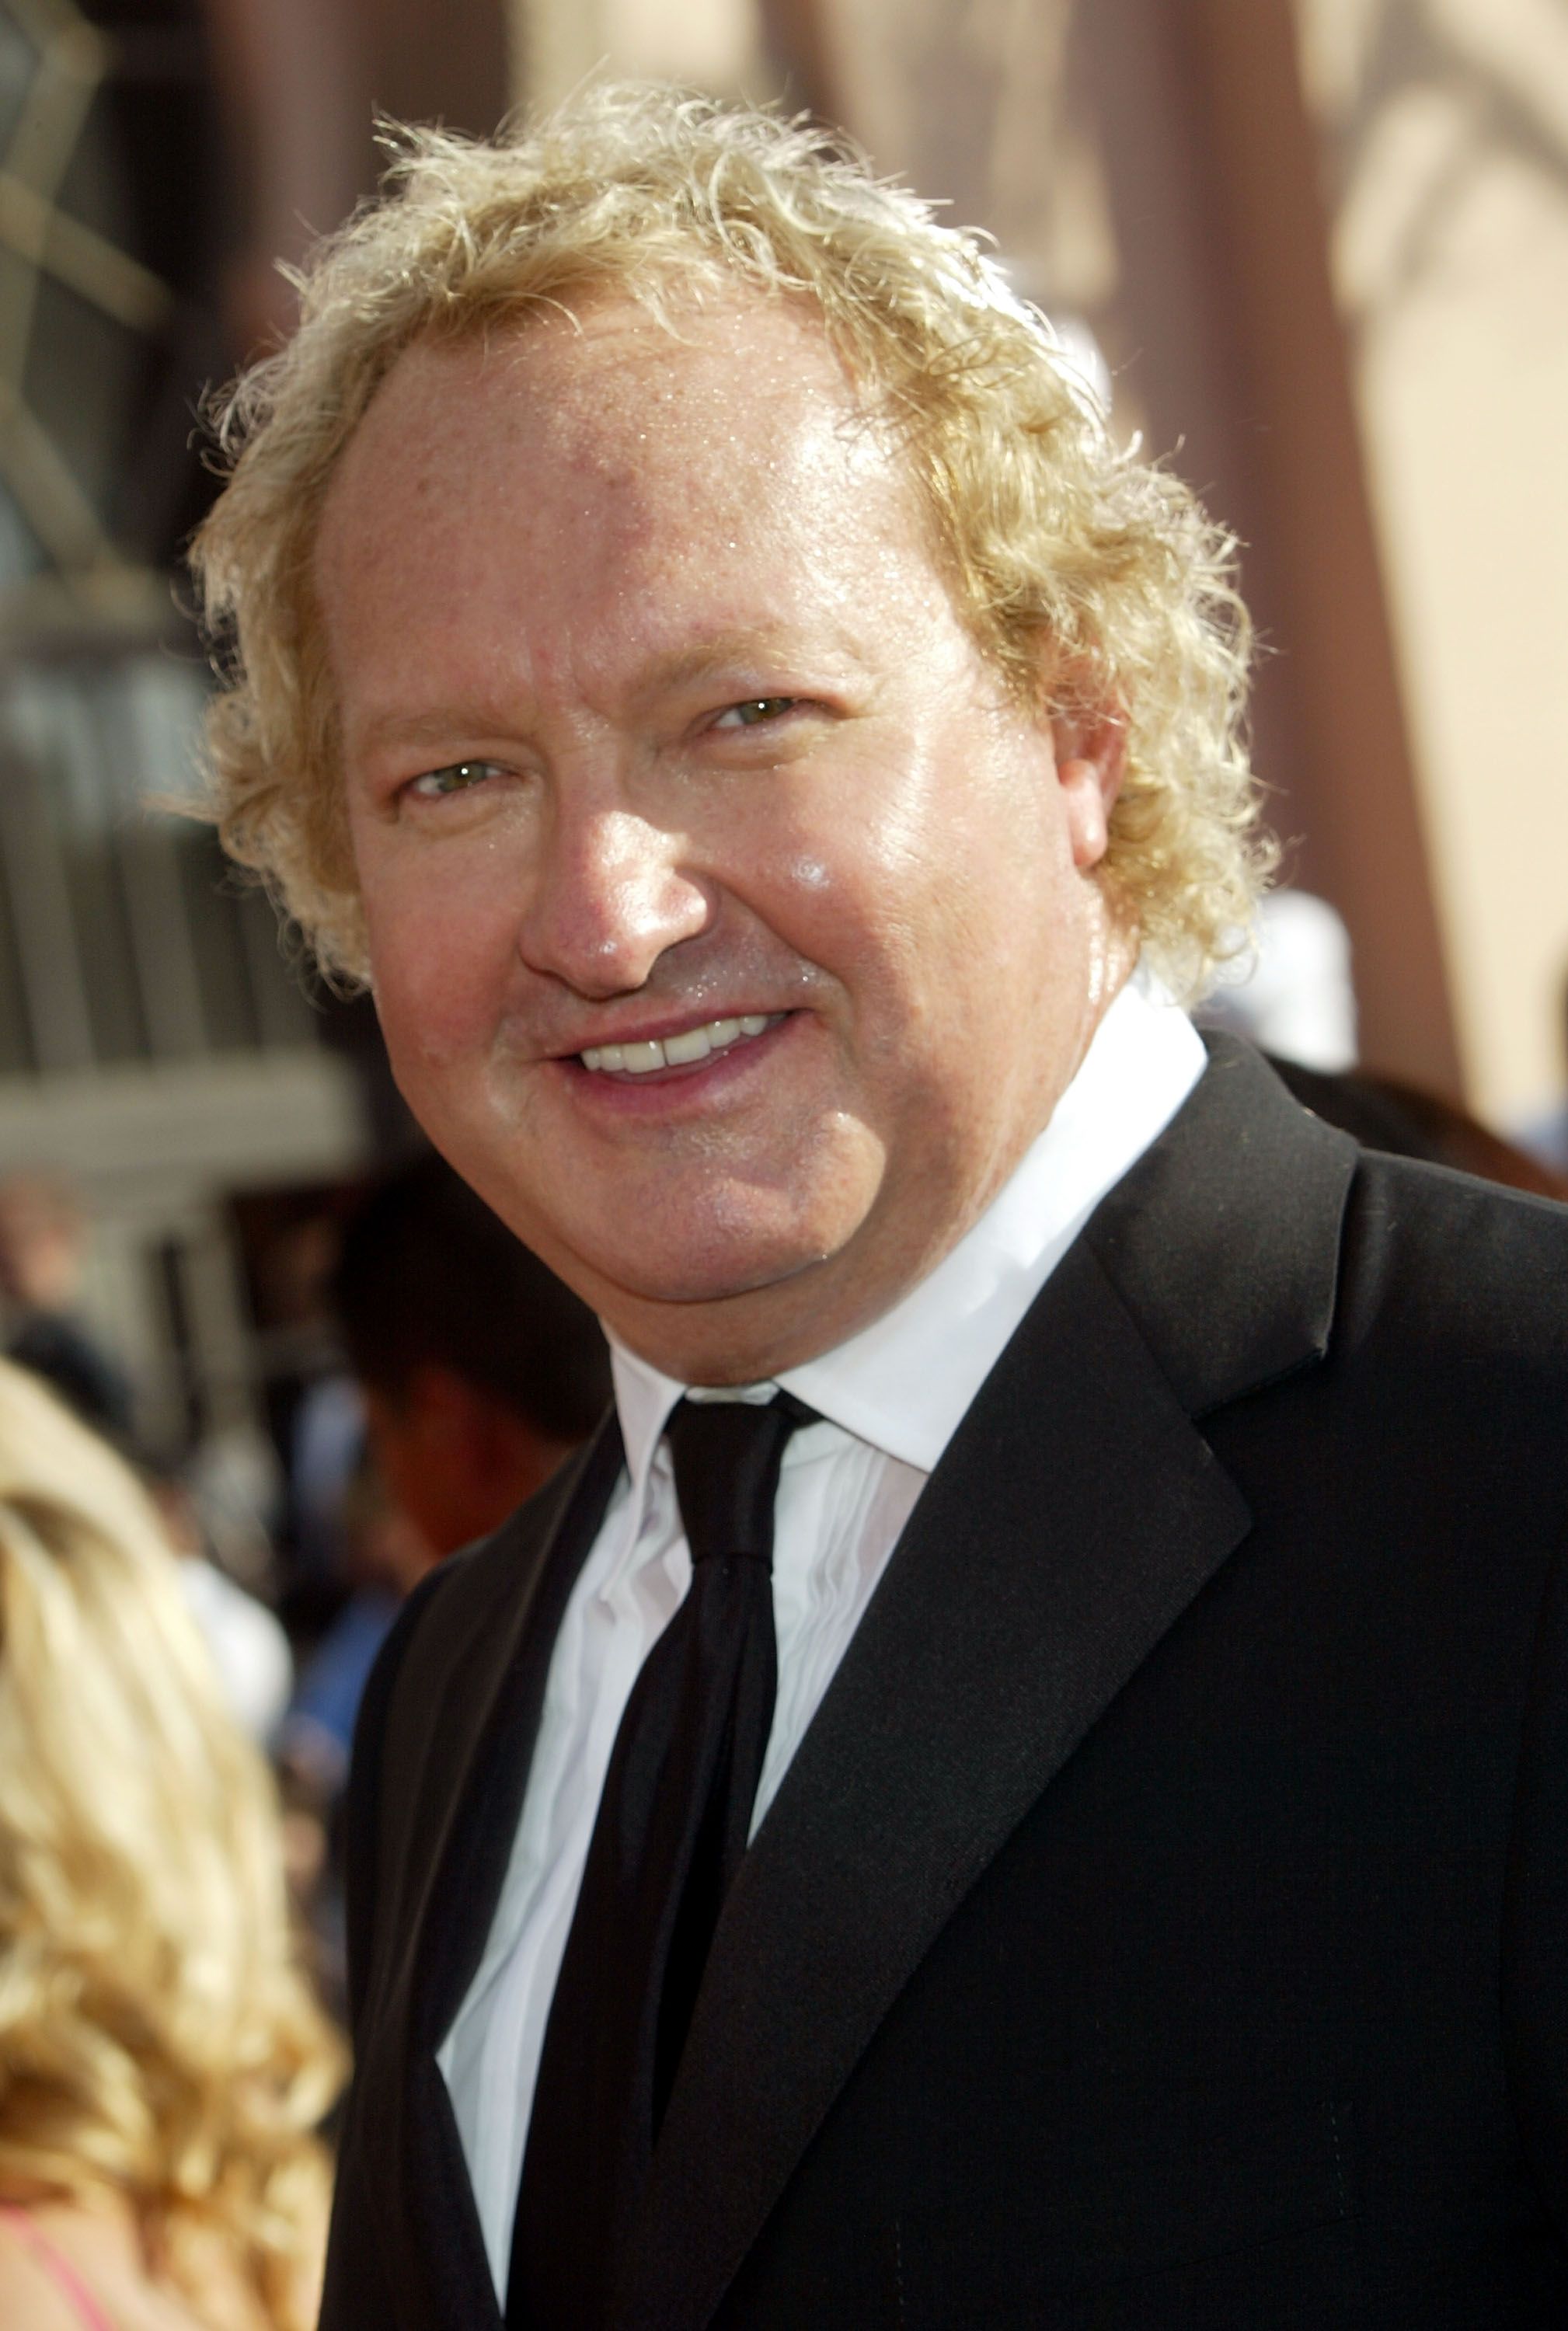  Randy Quaid at the 57th Annual Emmy Awards in 2005 in Los Angeles, California | Source: Getty Images